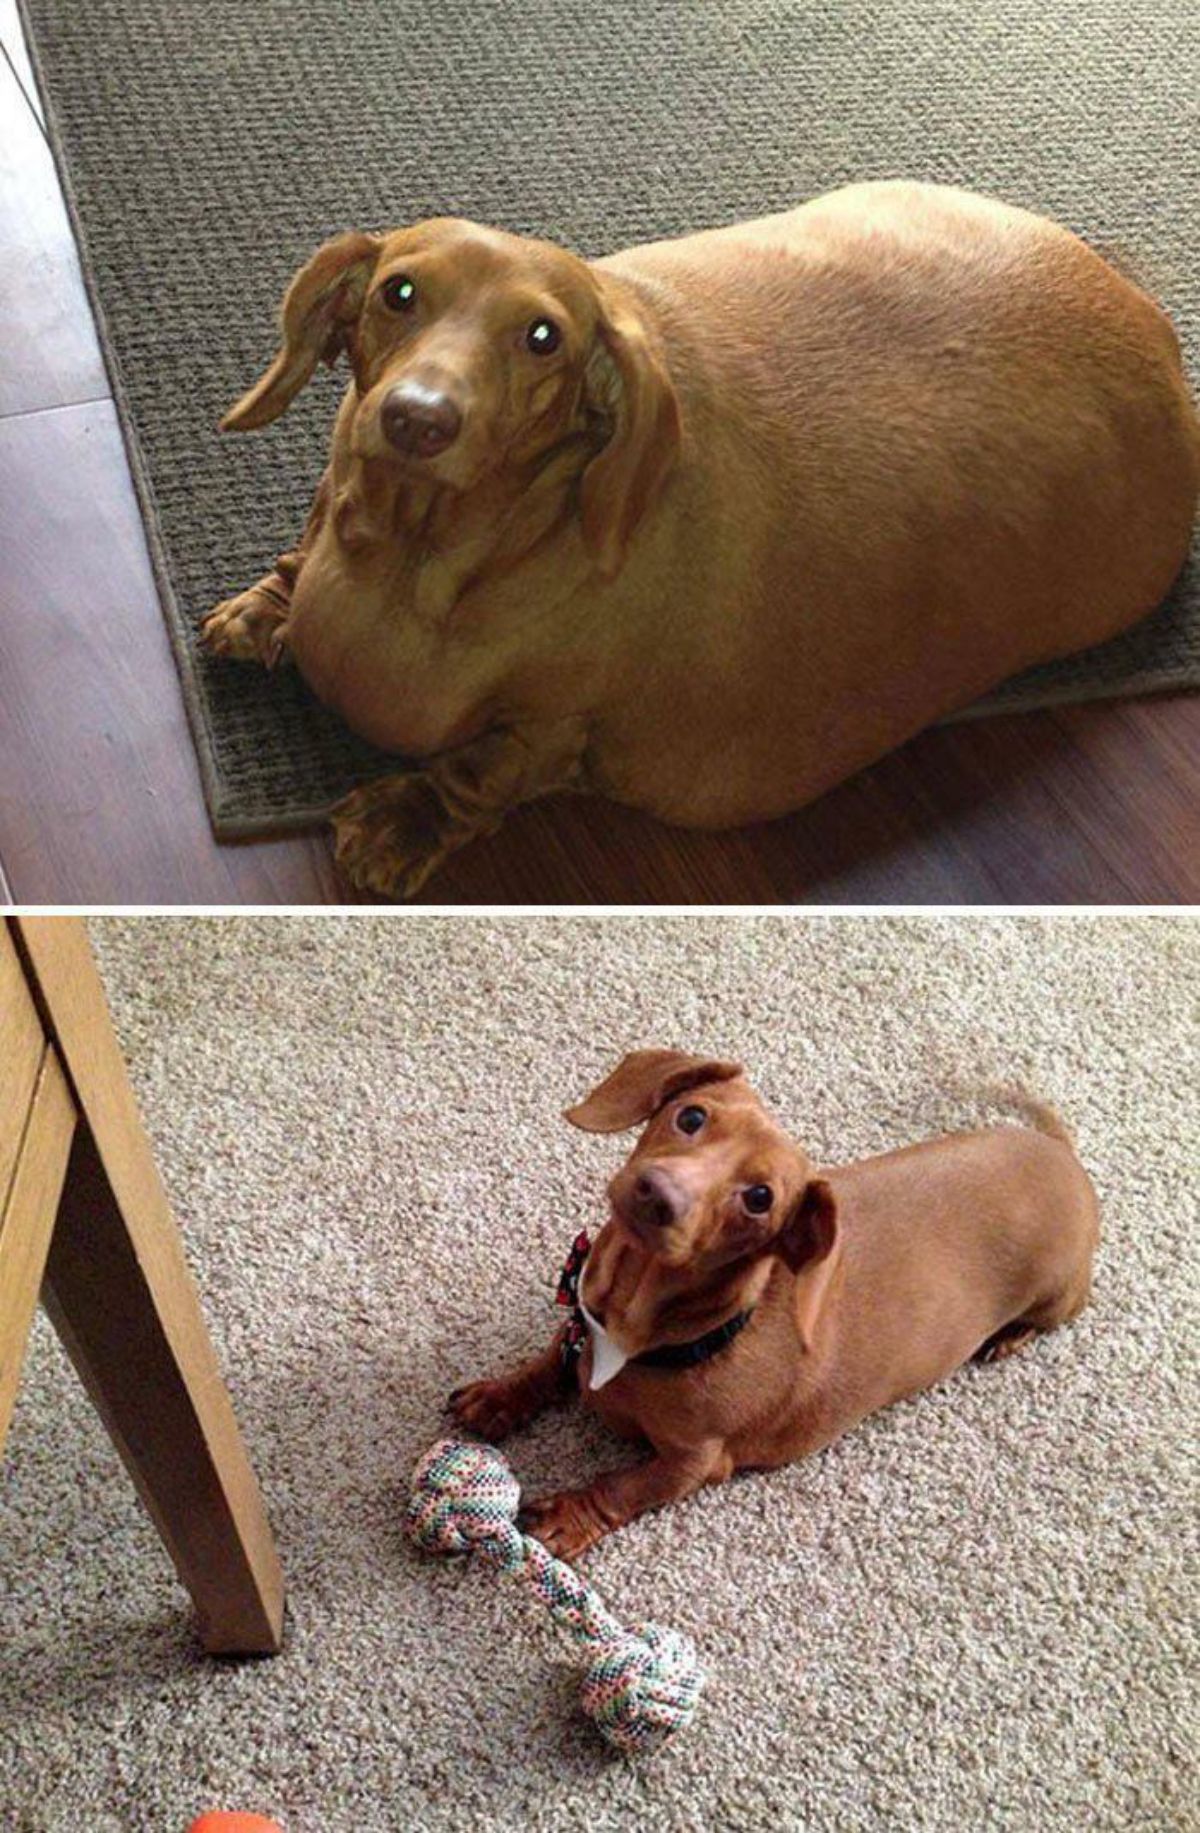 1 photo of an overweight brown dog and 1 photo of the same dog who has lost a lot of weight